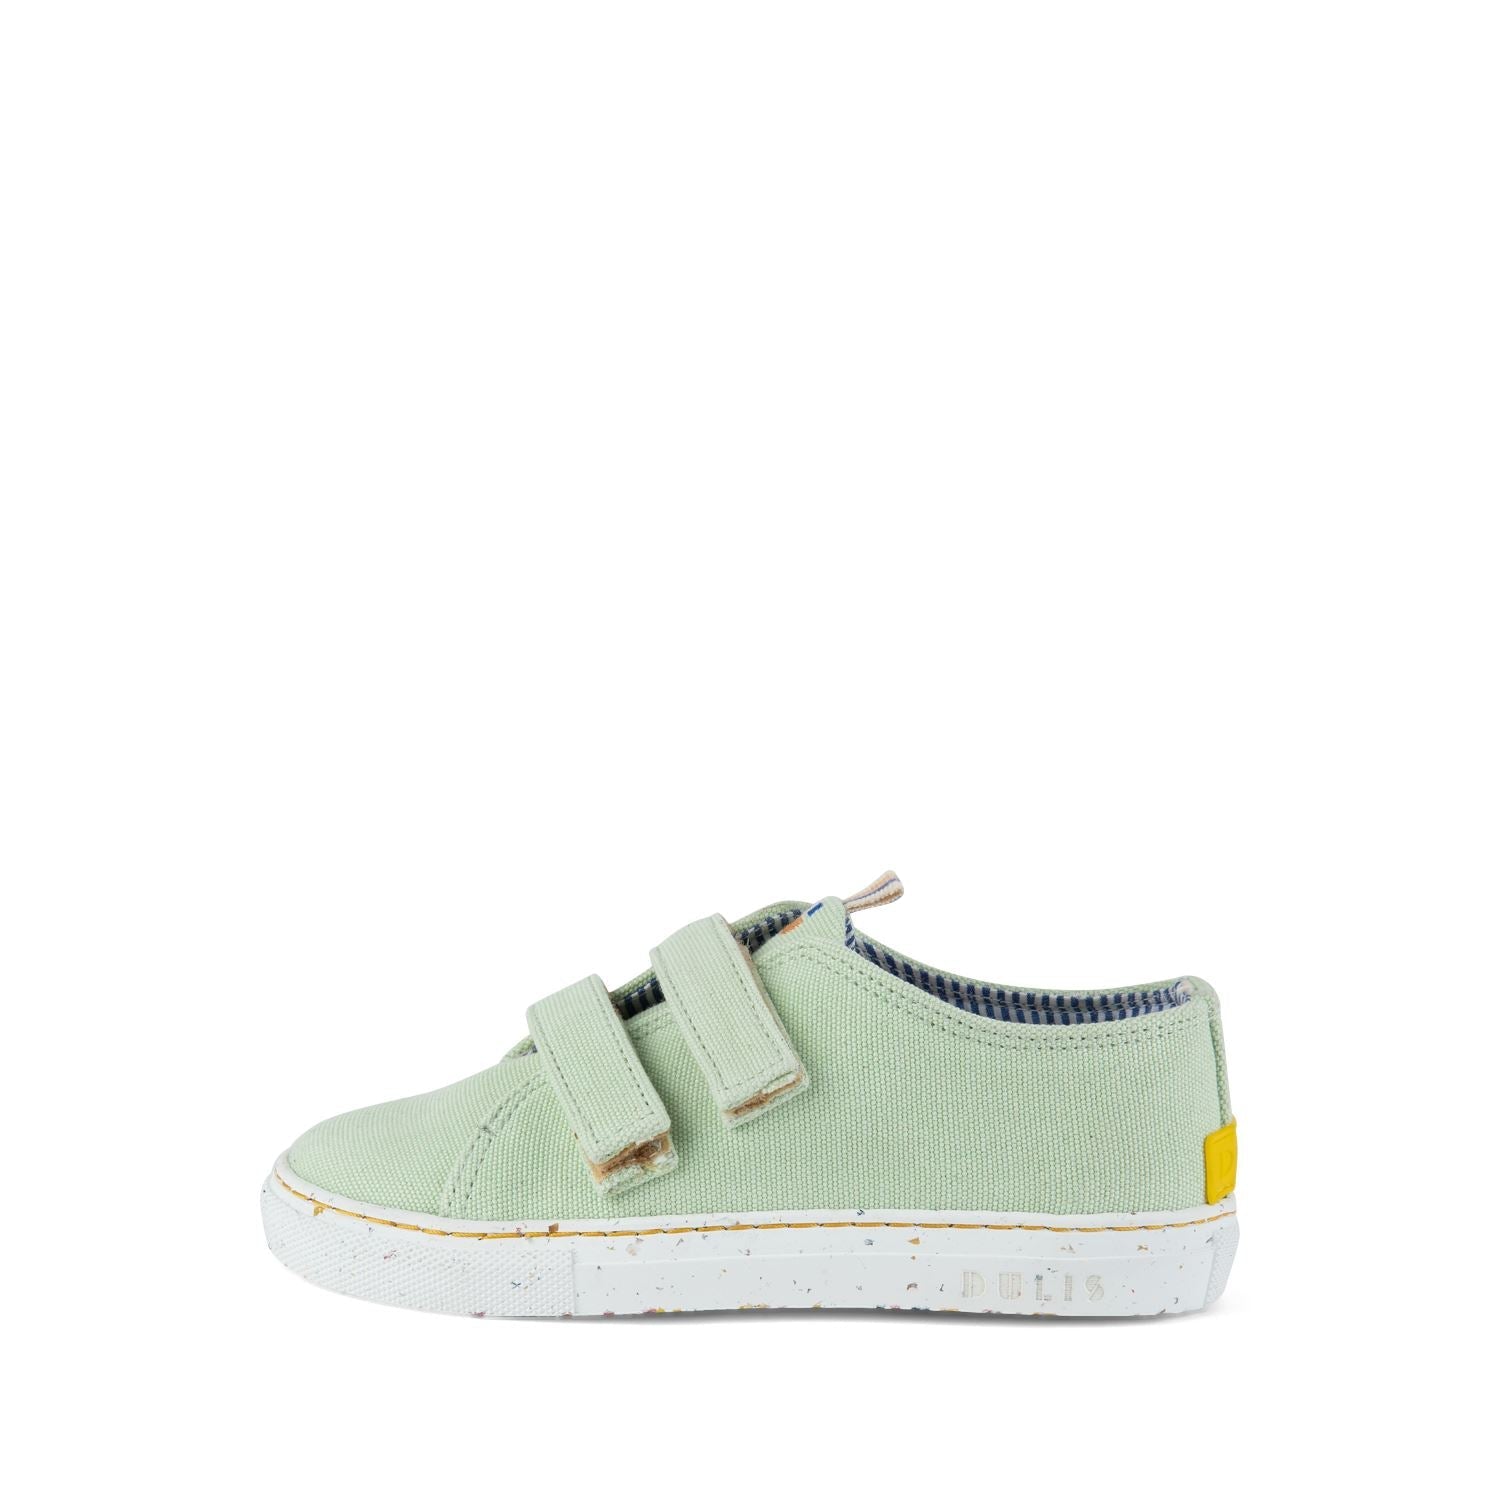 Anis Eco Strap Sneakers Shoes Dulis Shoes 